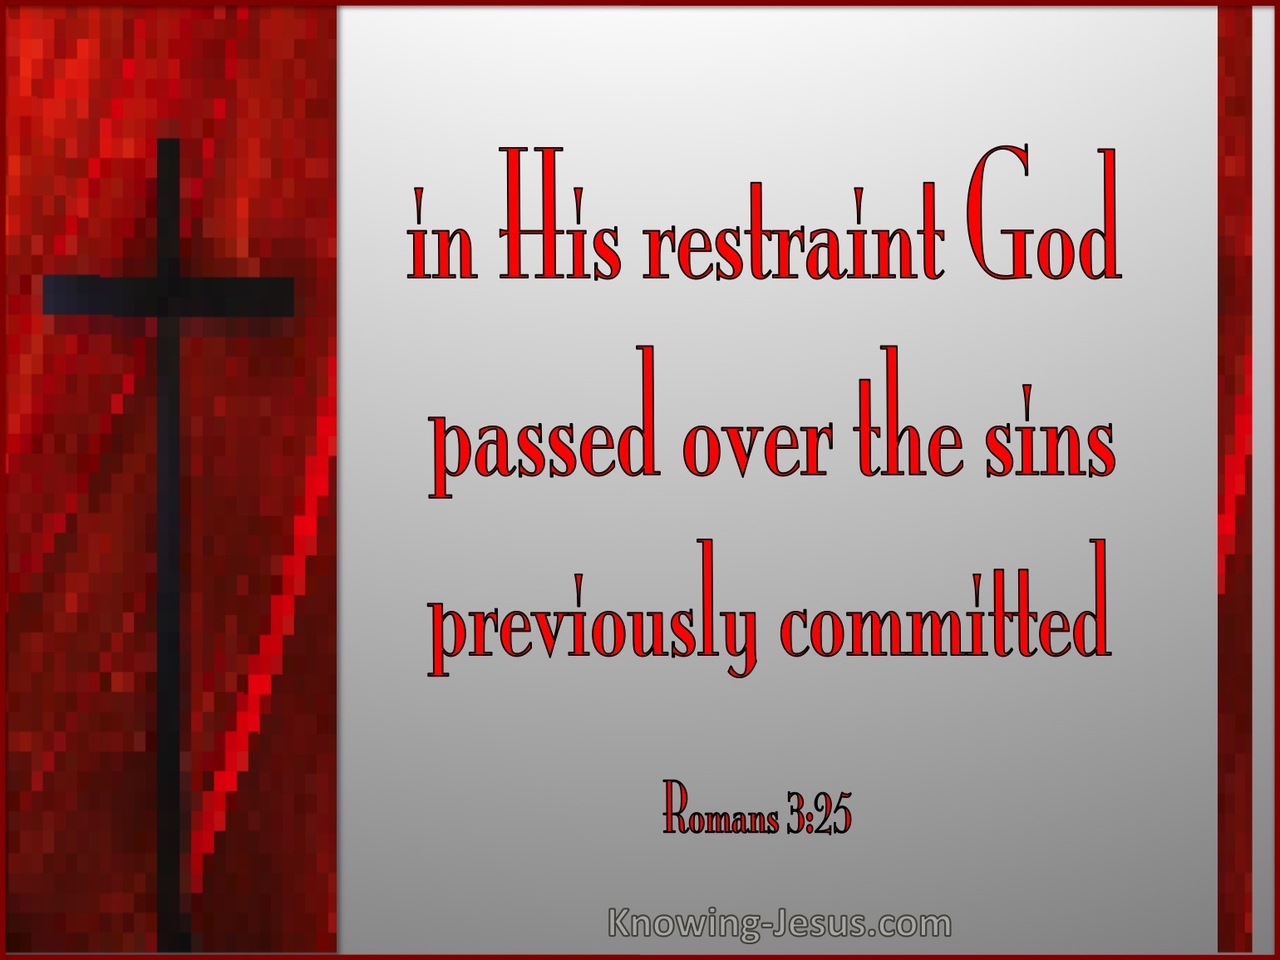 Romans 3:25 God Passed Over Sins (silver)